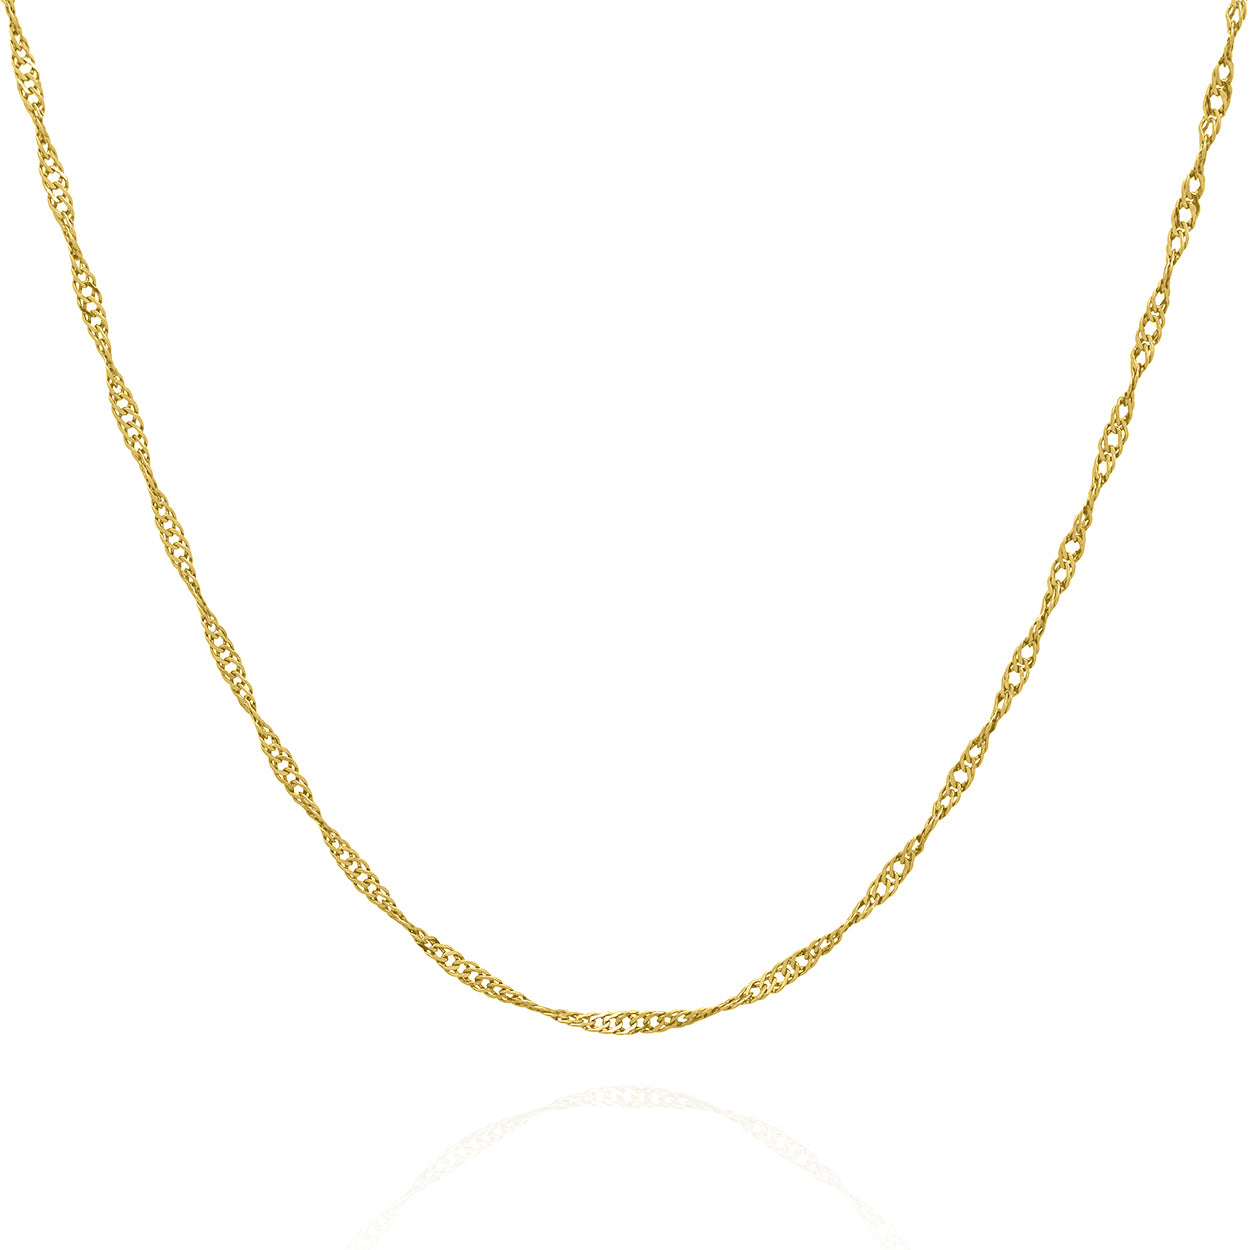 1.3mm Wide Singapore Style Chain Solid Gold Yellow